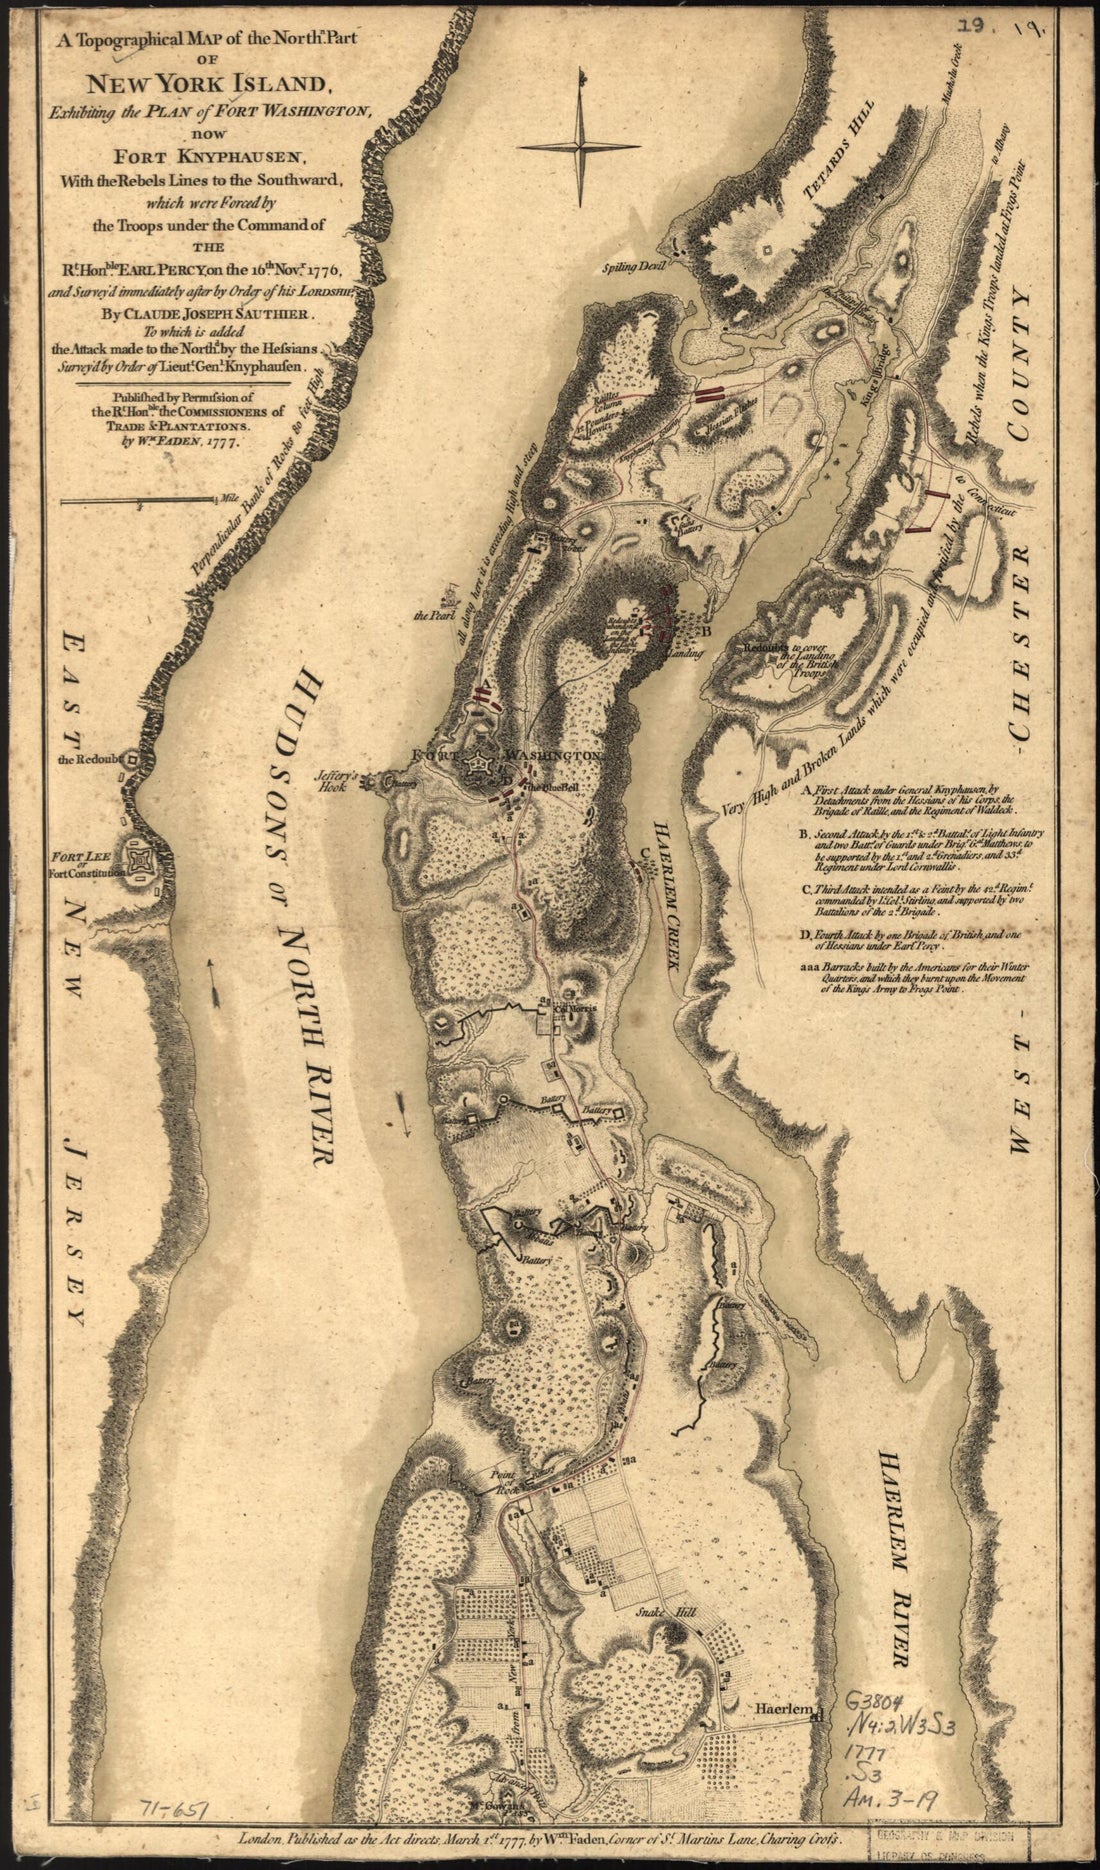 This old map of A Topographical Map of the Northn. Part of New York Island, Exhibiting the Plan of Fort Washington, Now Fort Knyphausen, With the Rebels Lines to the Southward, Which Were Forced by the Troops Under the Command of the Rt. Honble. Earl Per